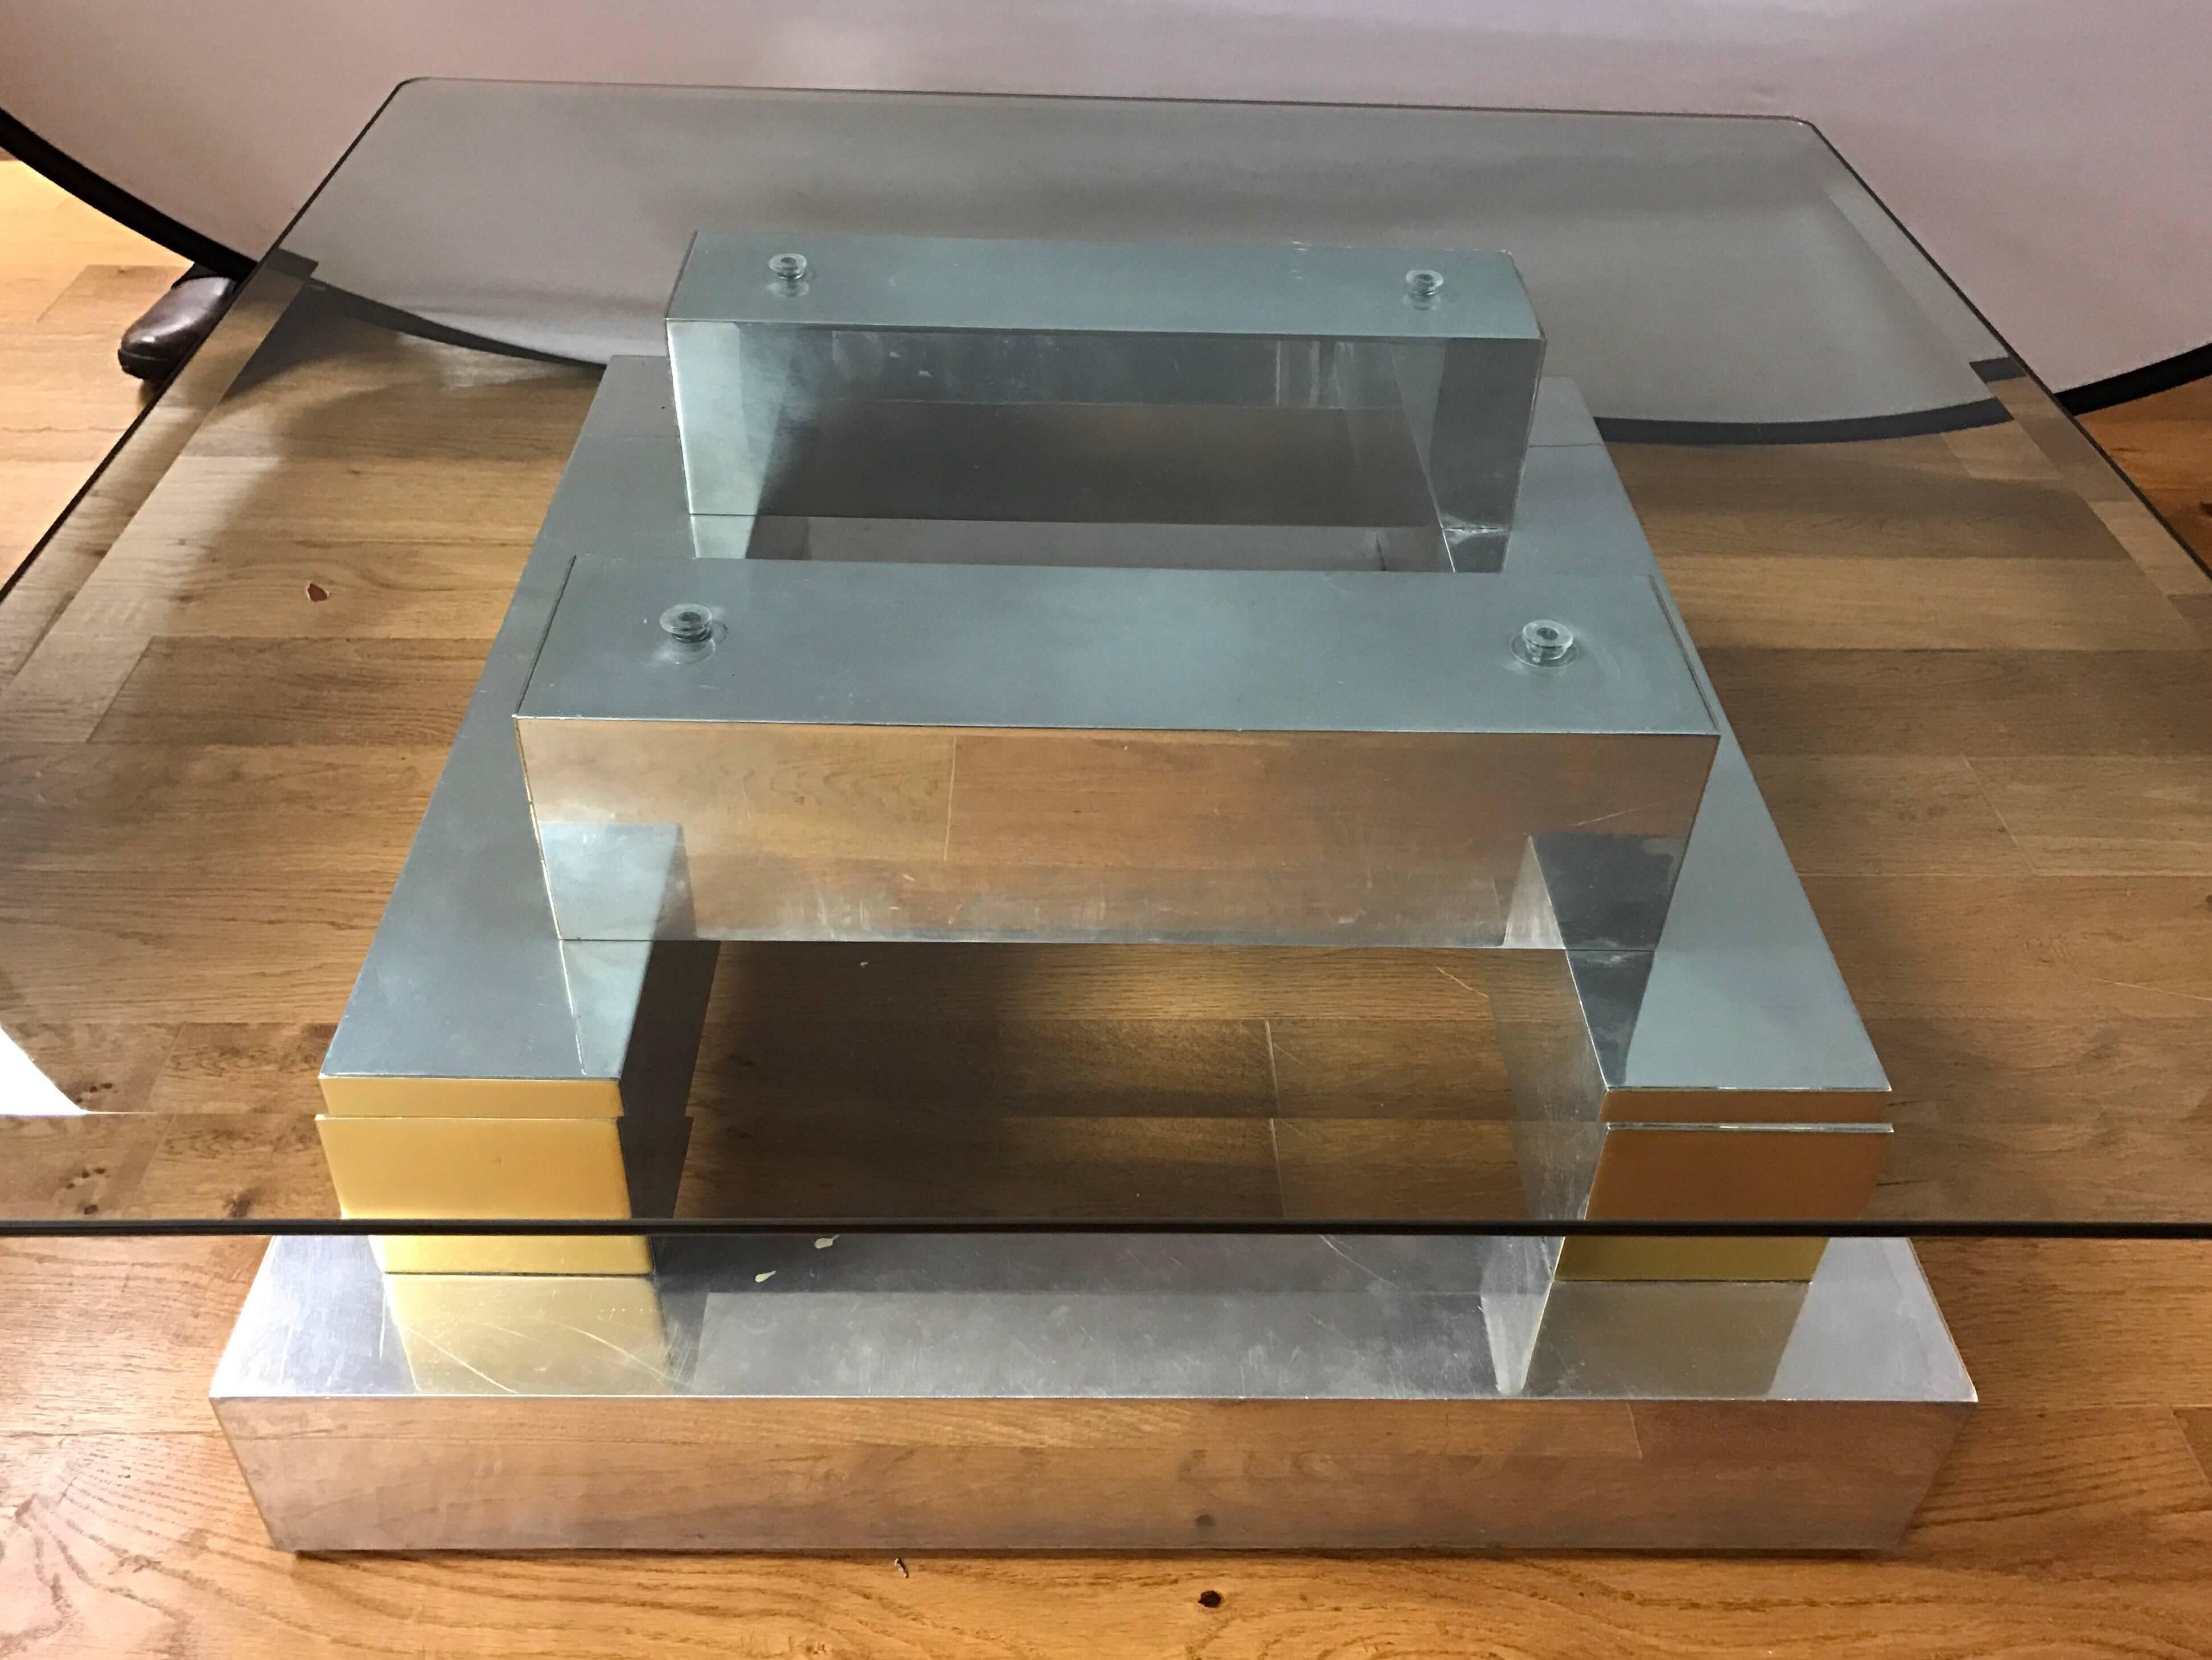 Brass Paul Evans Cityscape Cocktail Coffee Table 1970s Mid-Century Modern Brutalist